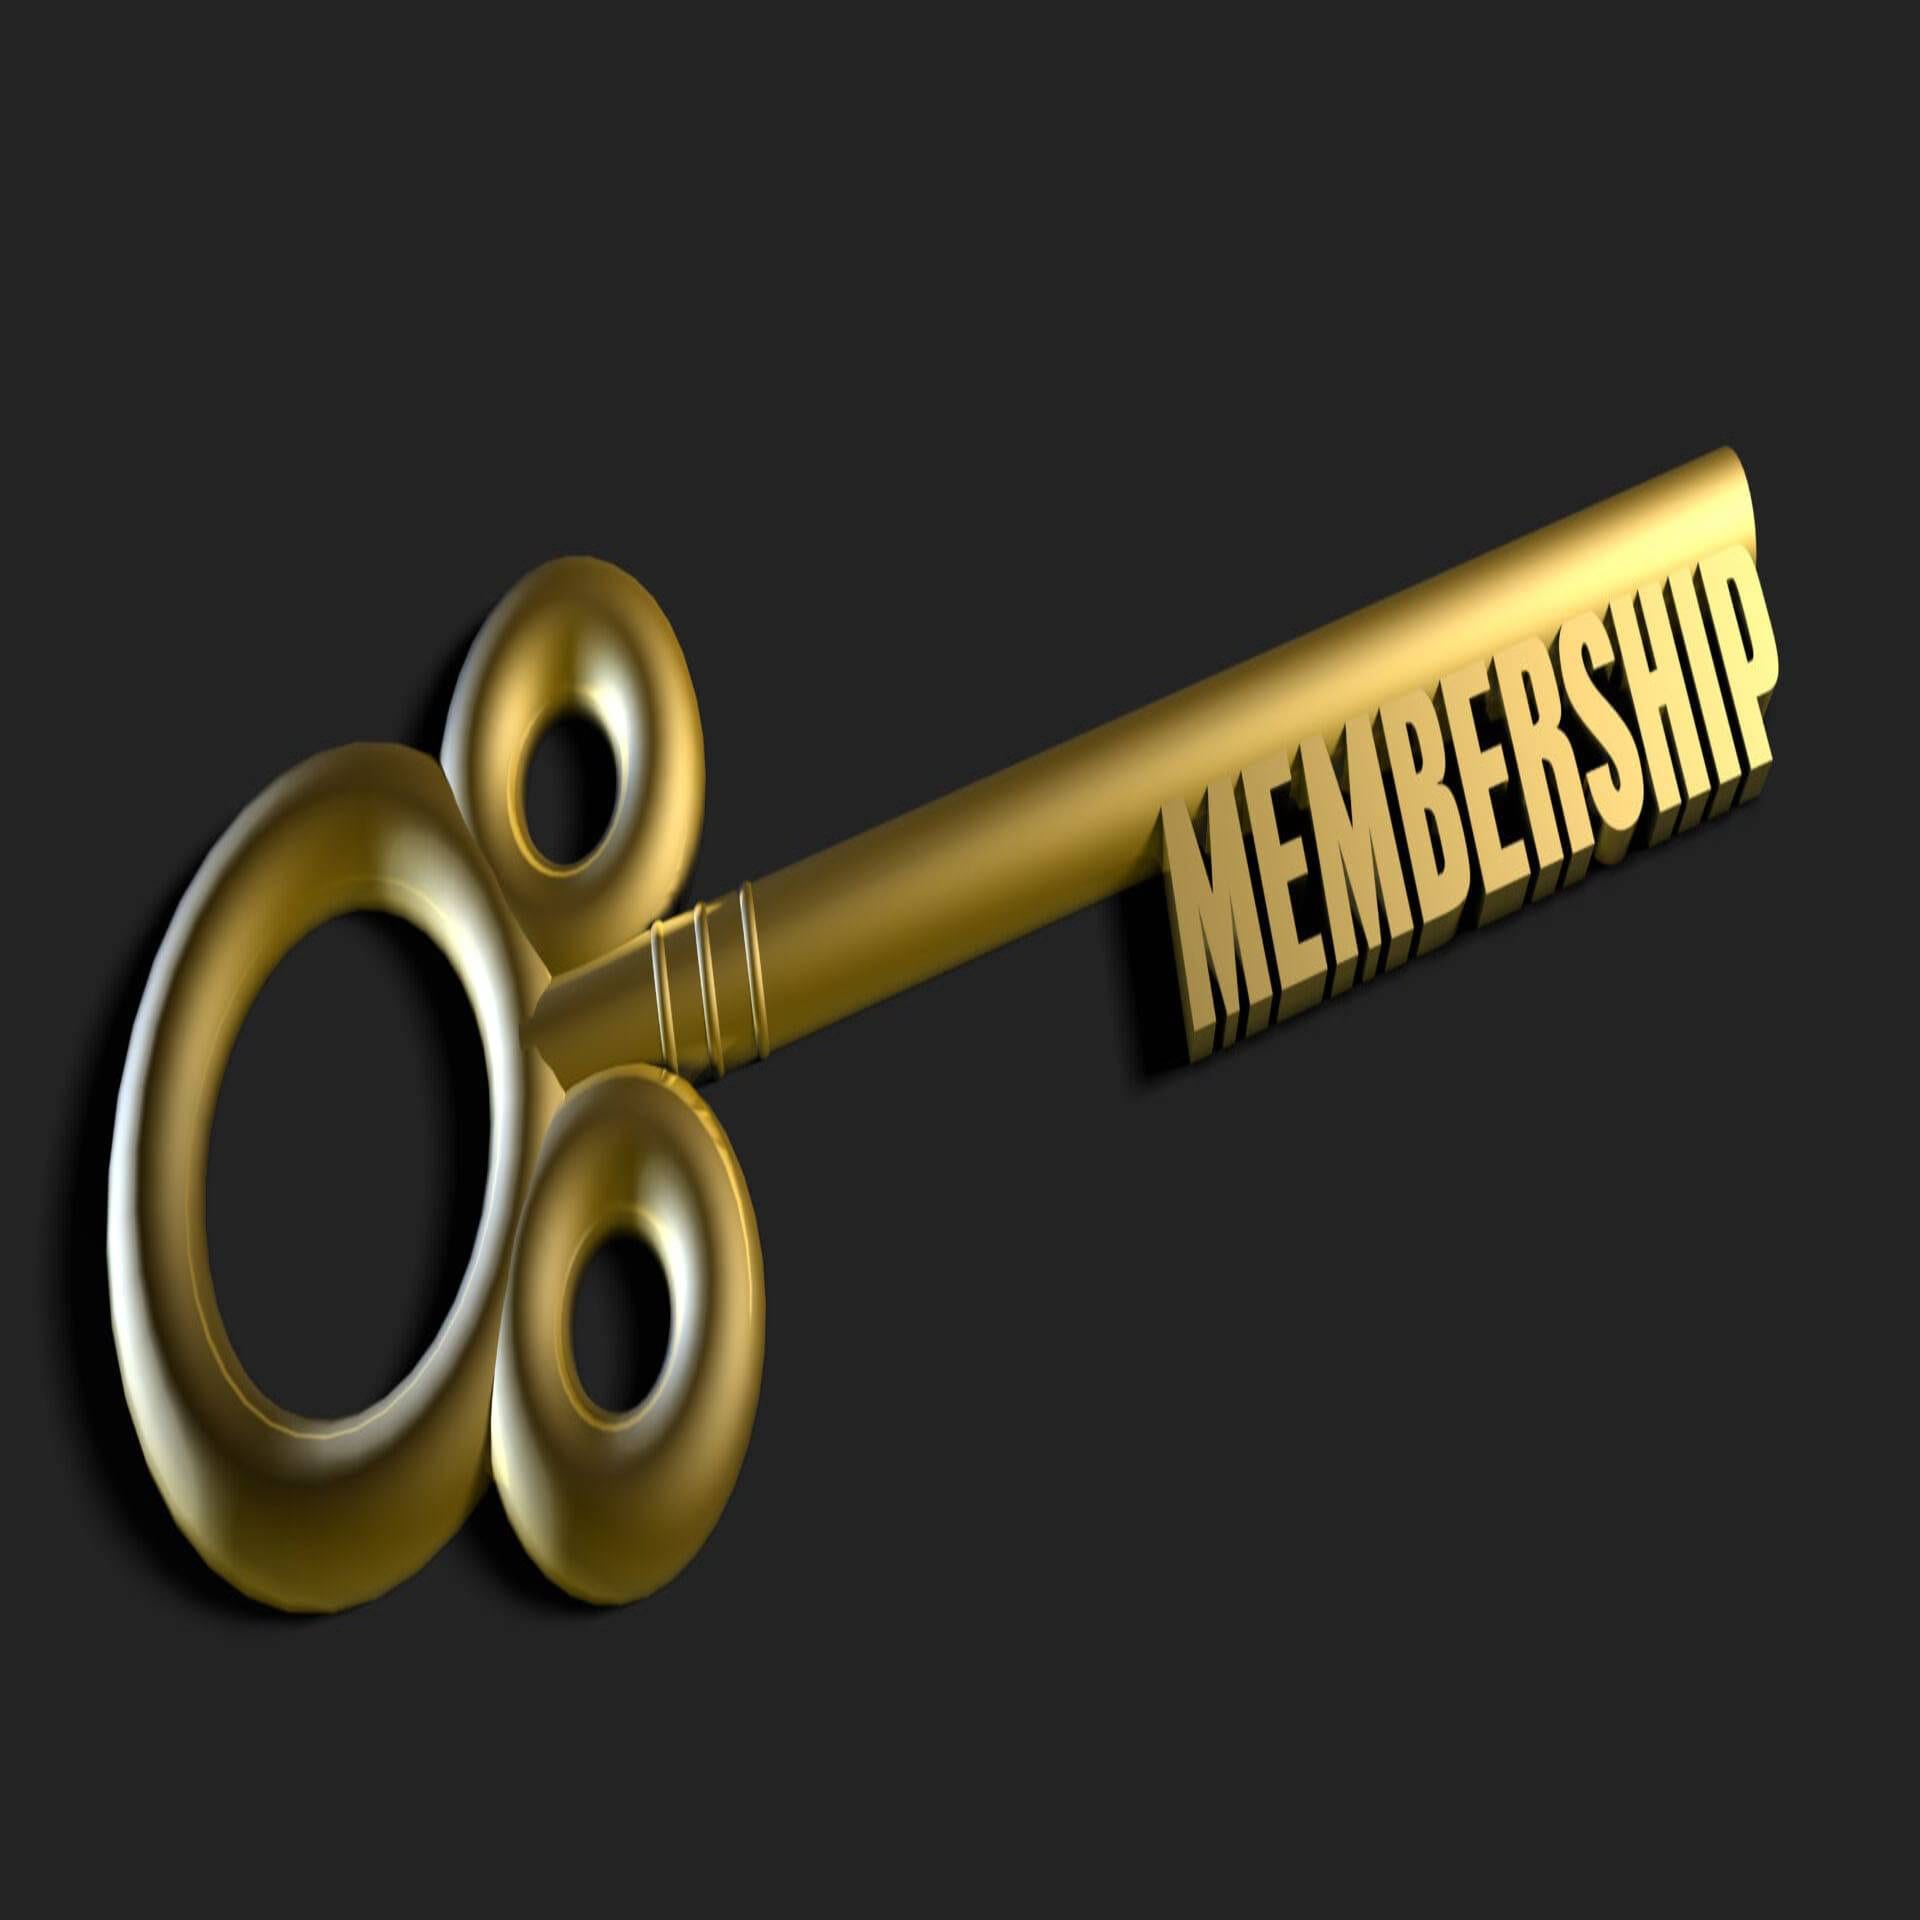 A golden key with the word membership on it.